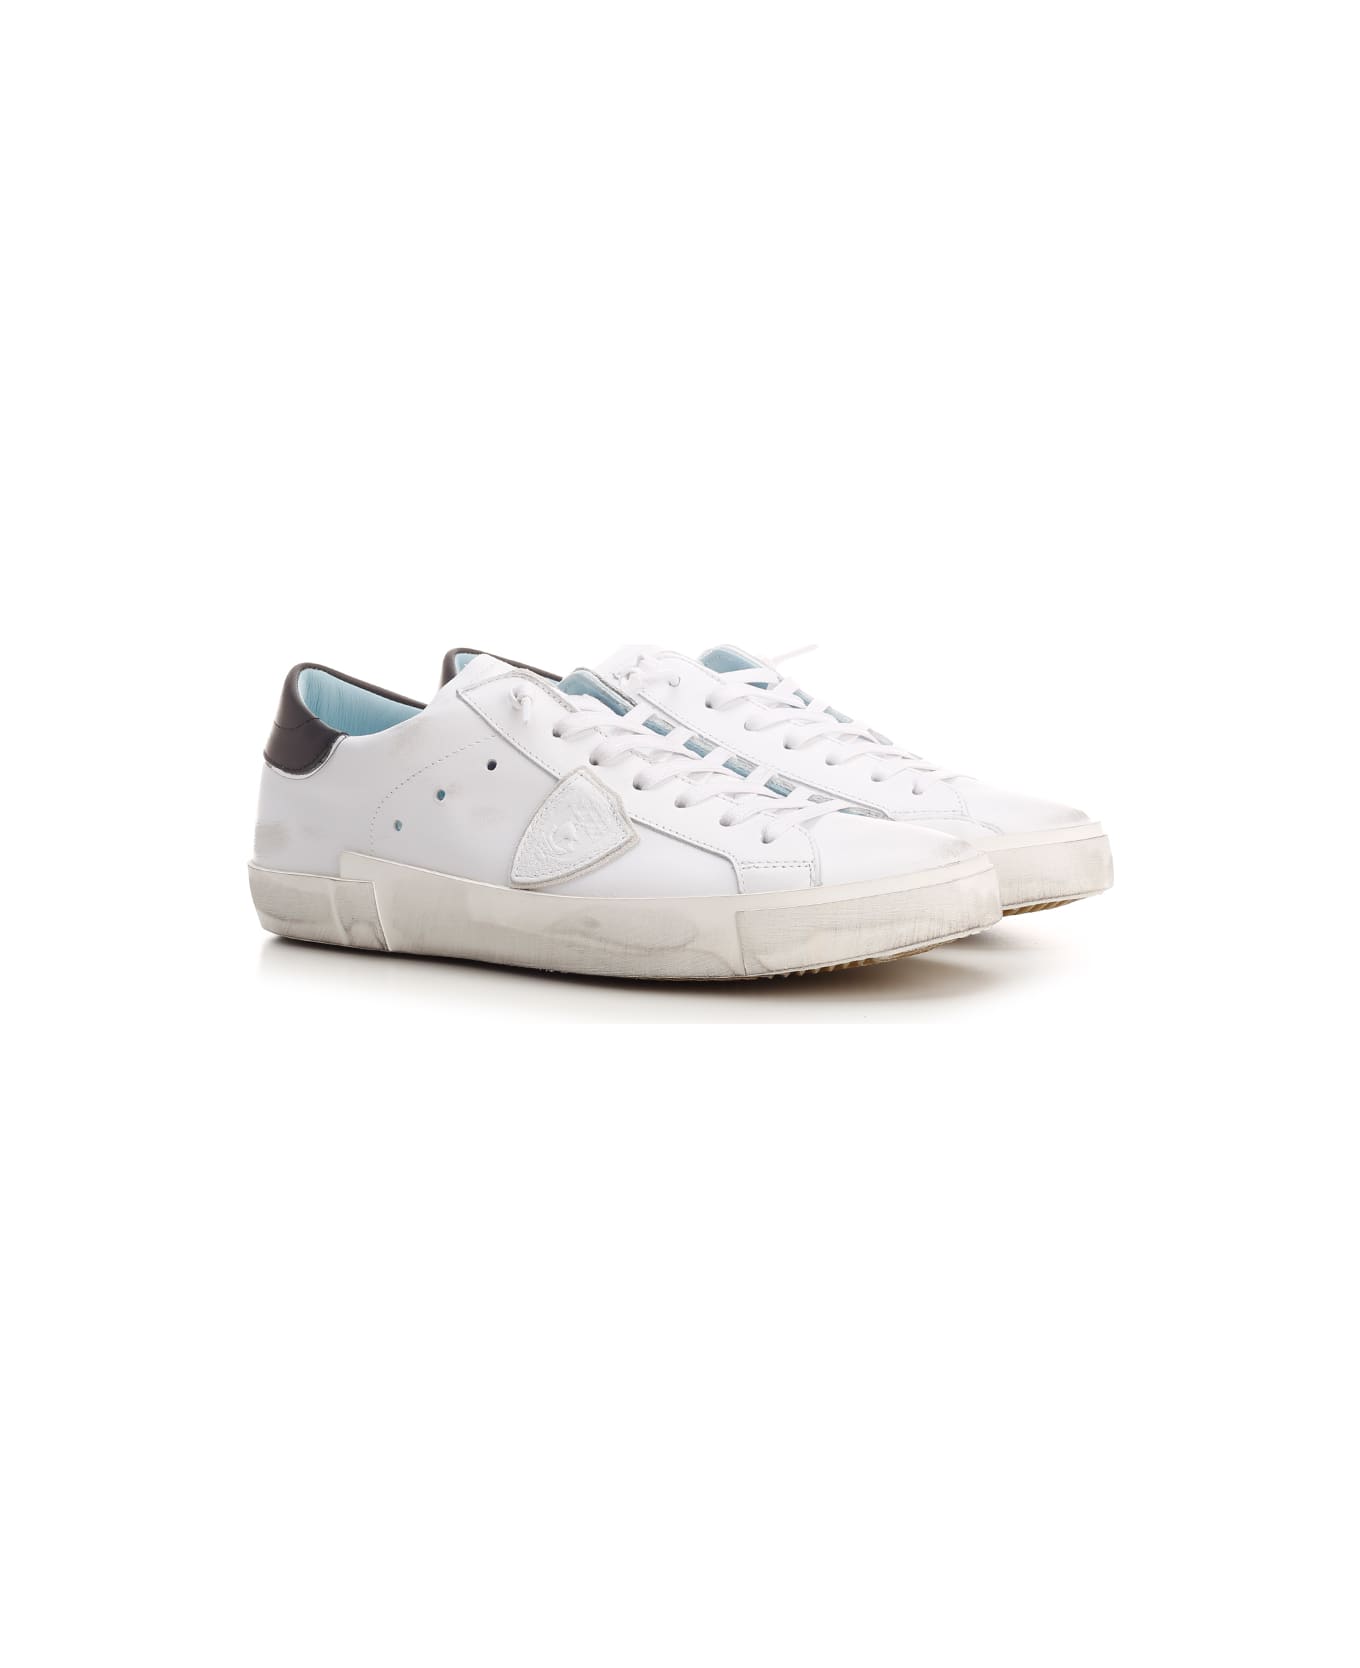 Philippe Model White 'prsx' Leather Sneakers With Black Heel Tab - Bianco